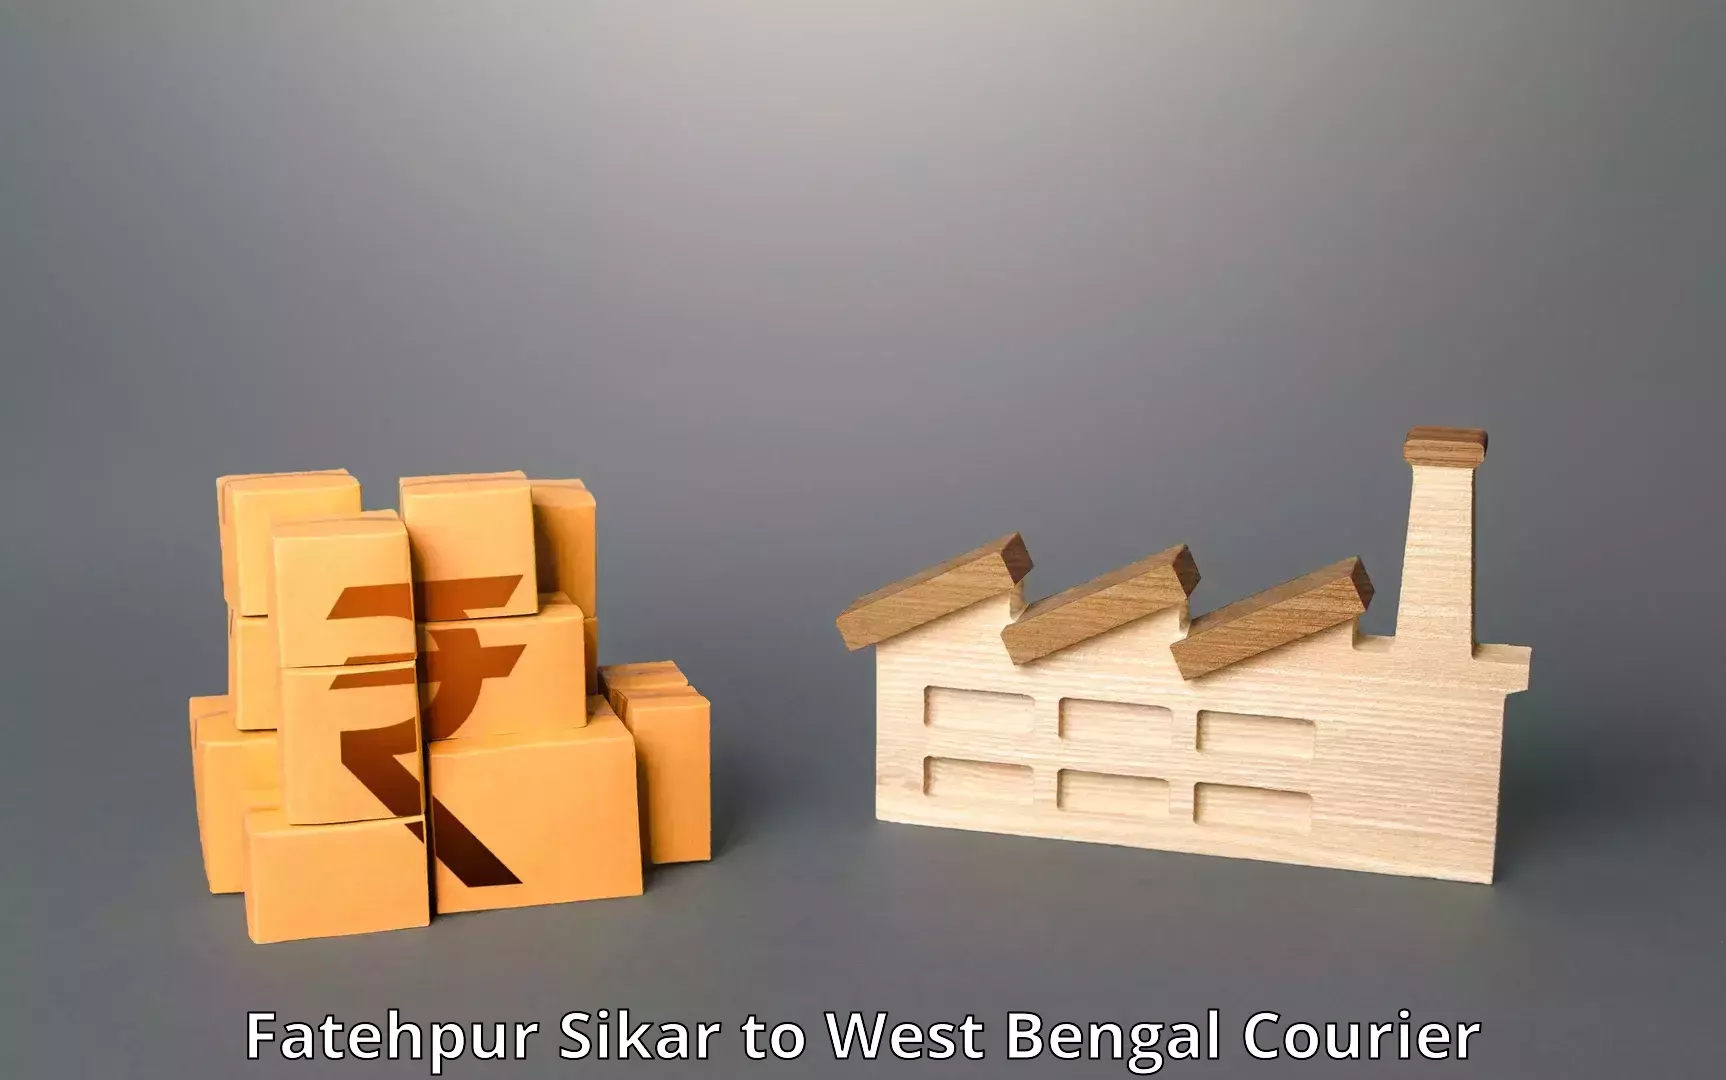 Reliable delivery network Fatehpur Sikar to West Bengal